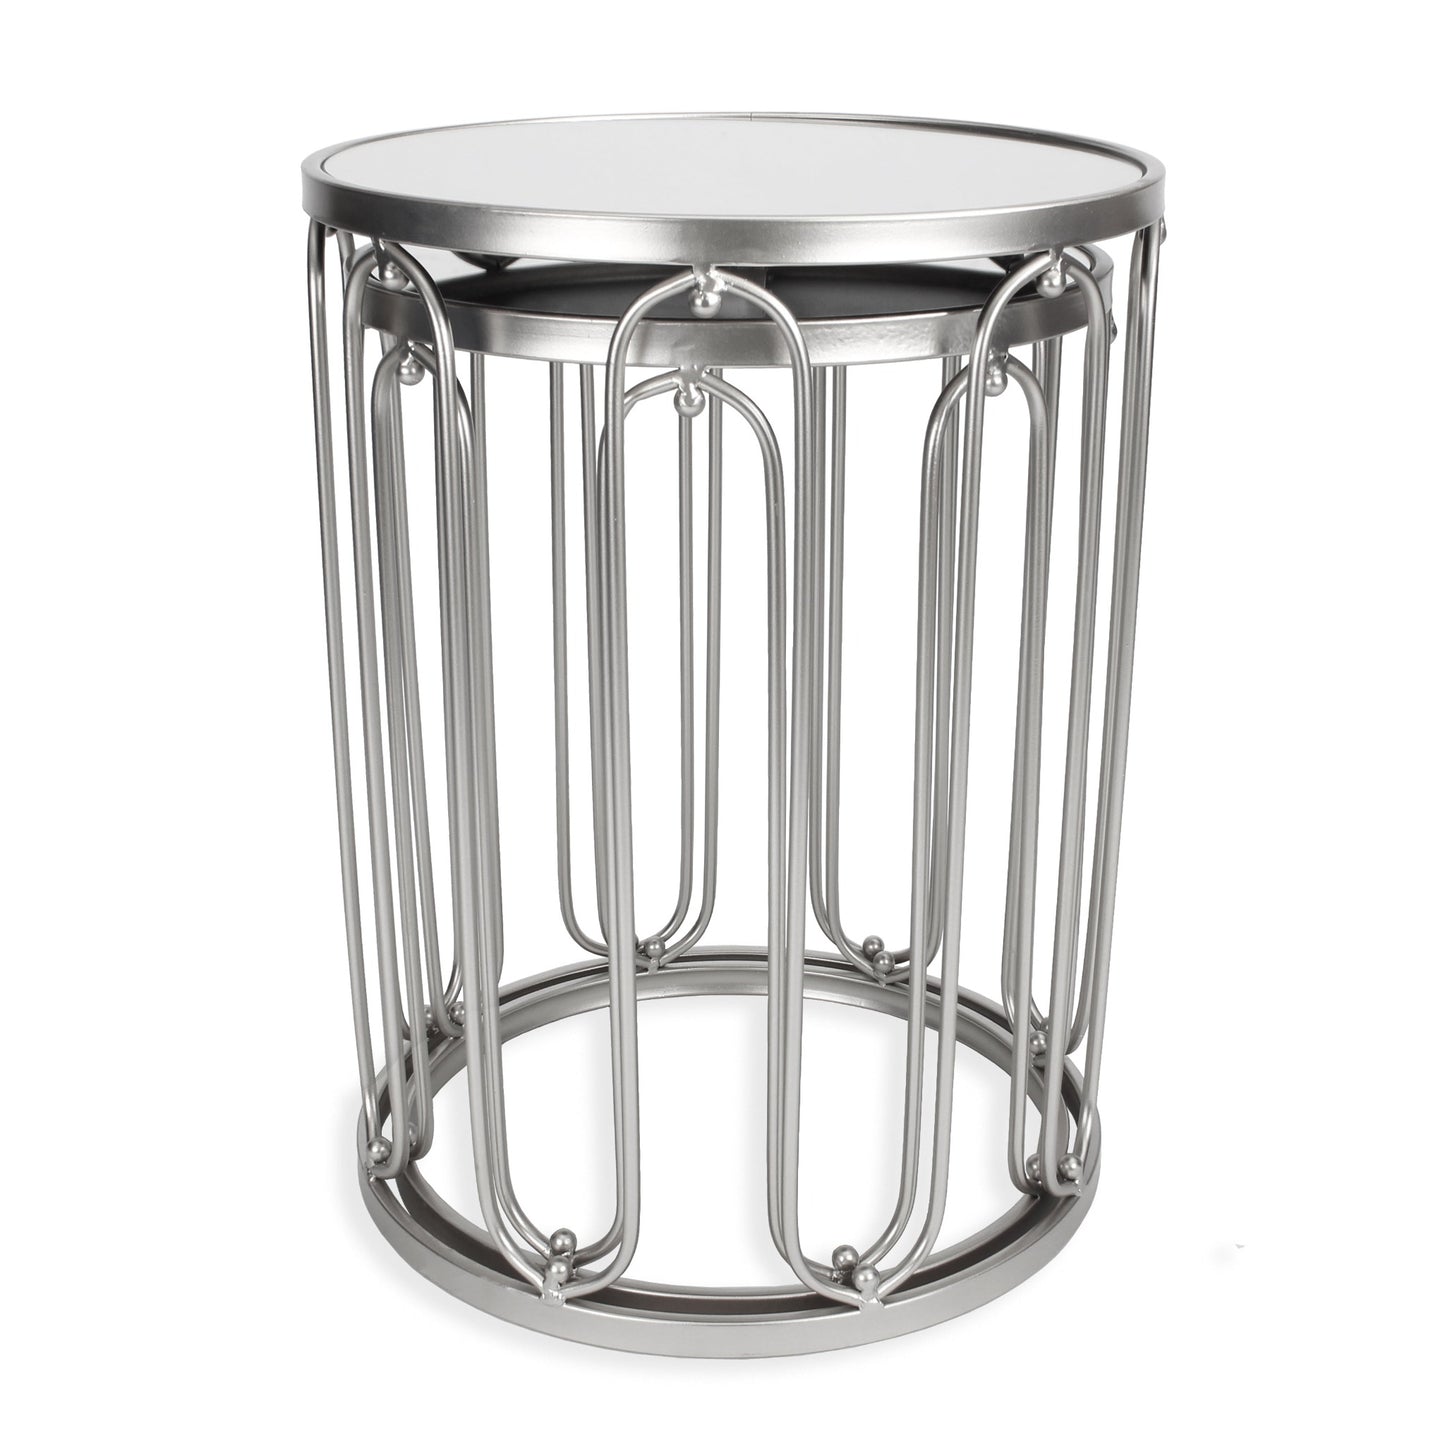 Braswell End Table Set - Silver